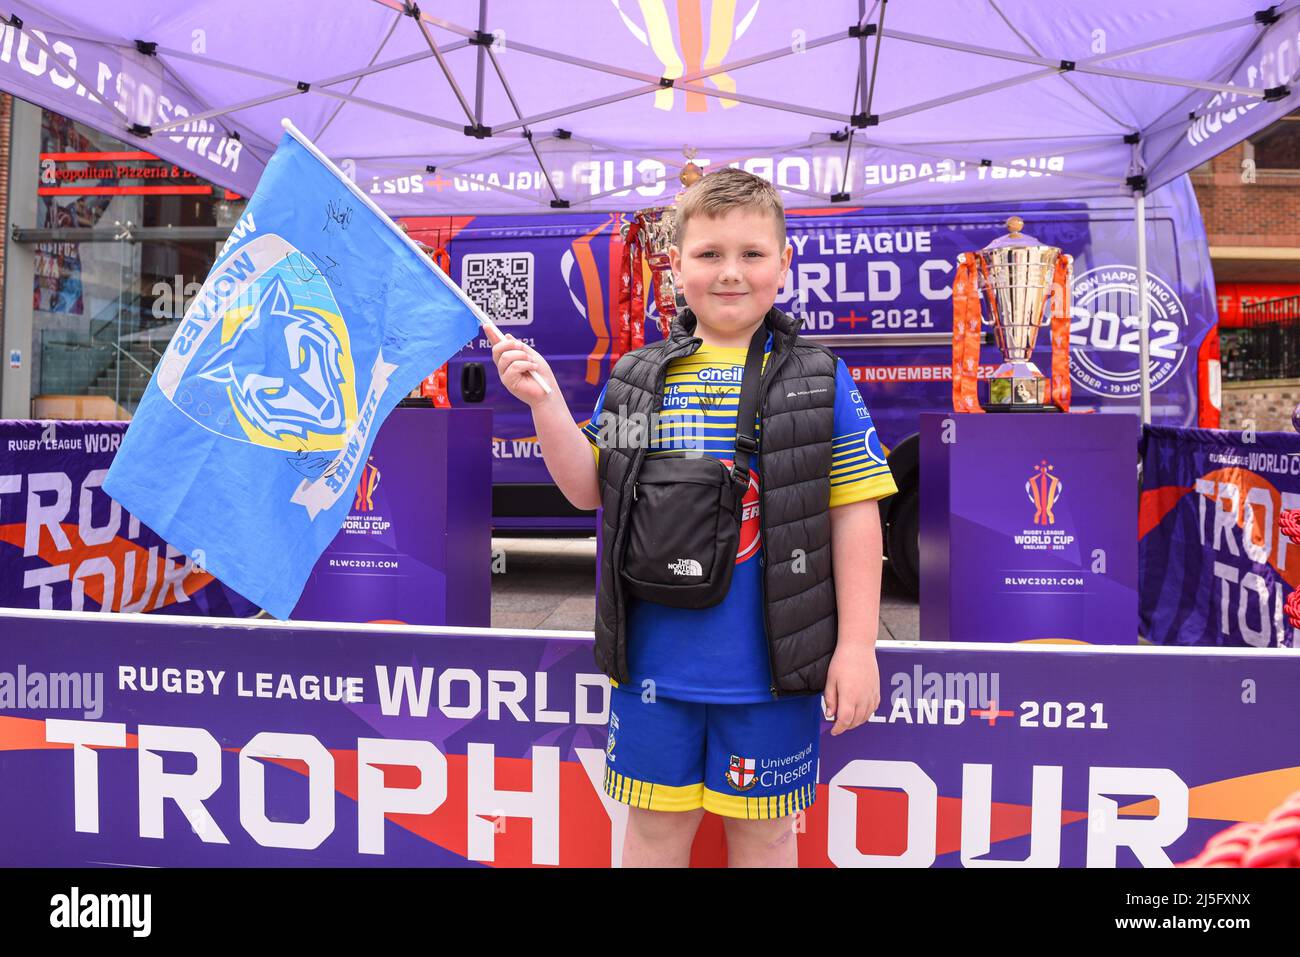 A young Warrington Wolves fan poses for photos next to the Rugby League World Cup Trophies in the fan zone before the game Stock Photo